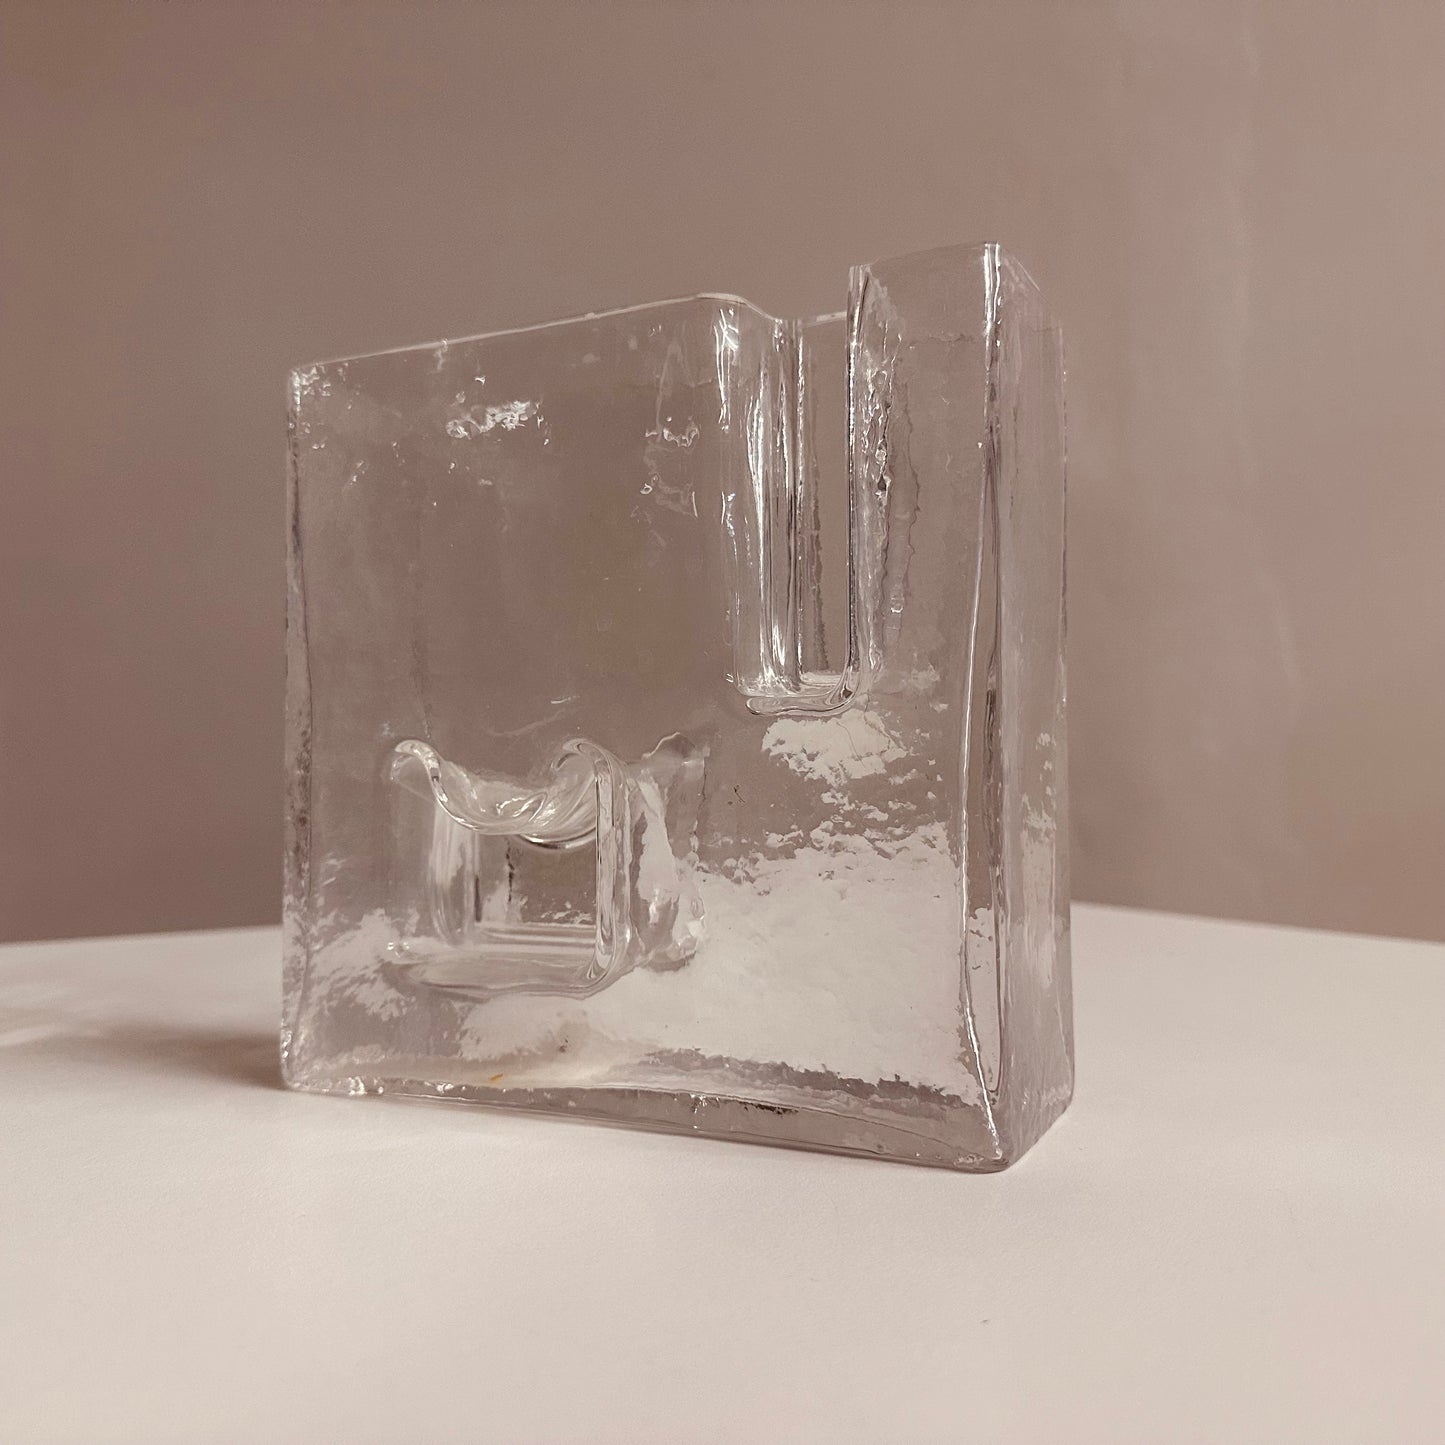 ICE ART GLASS VASE ATTRIBUTED TO CLAUS JOSEF RIEDEL, AUSTRIA, 1970S